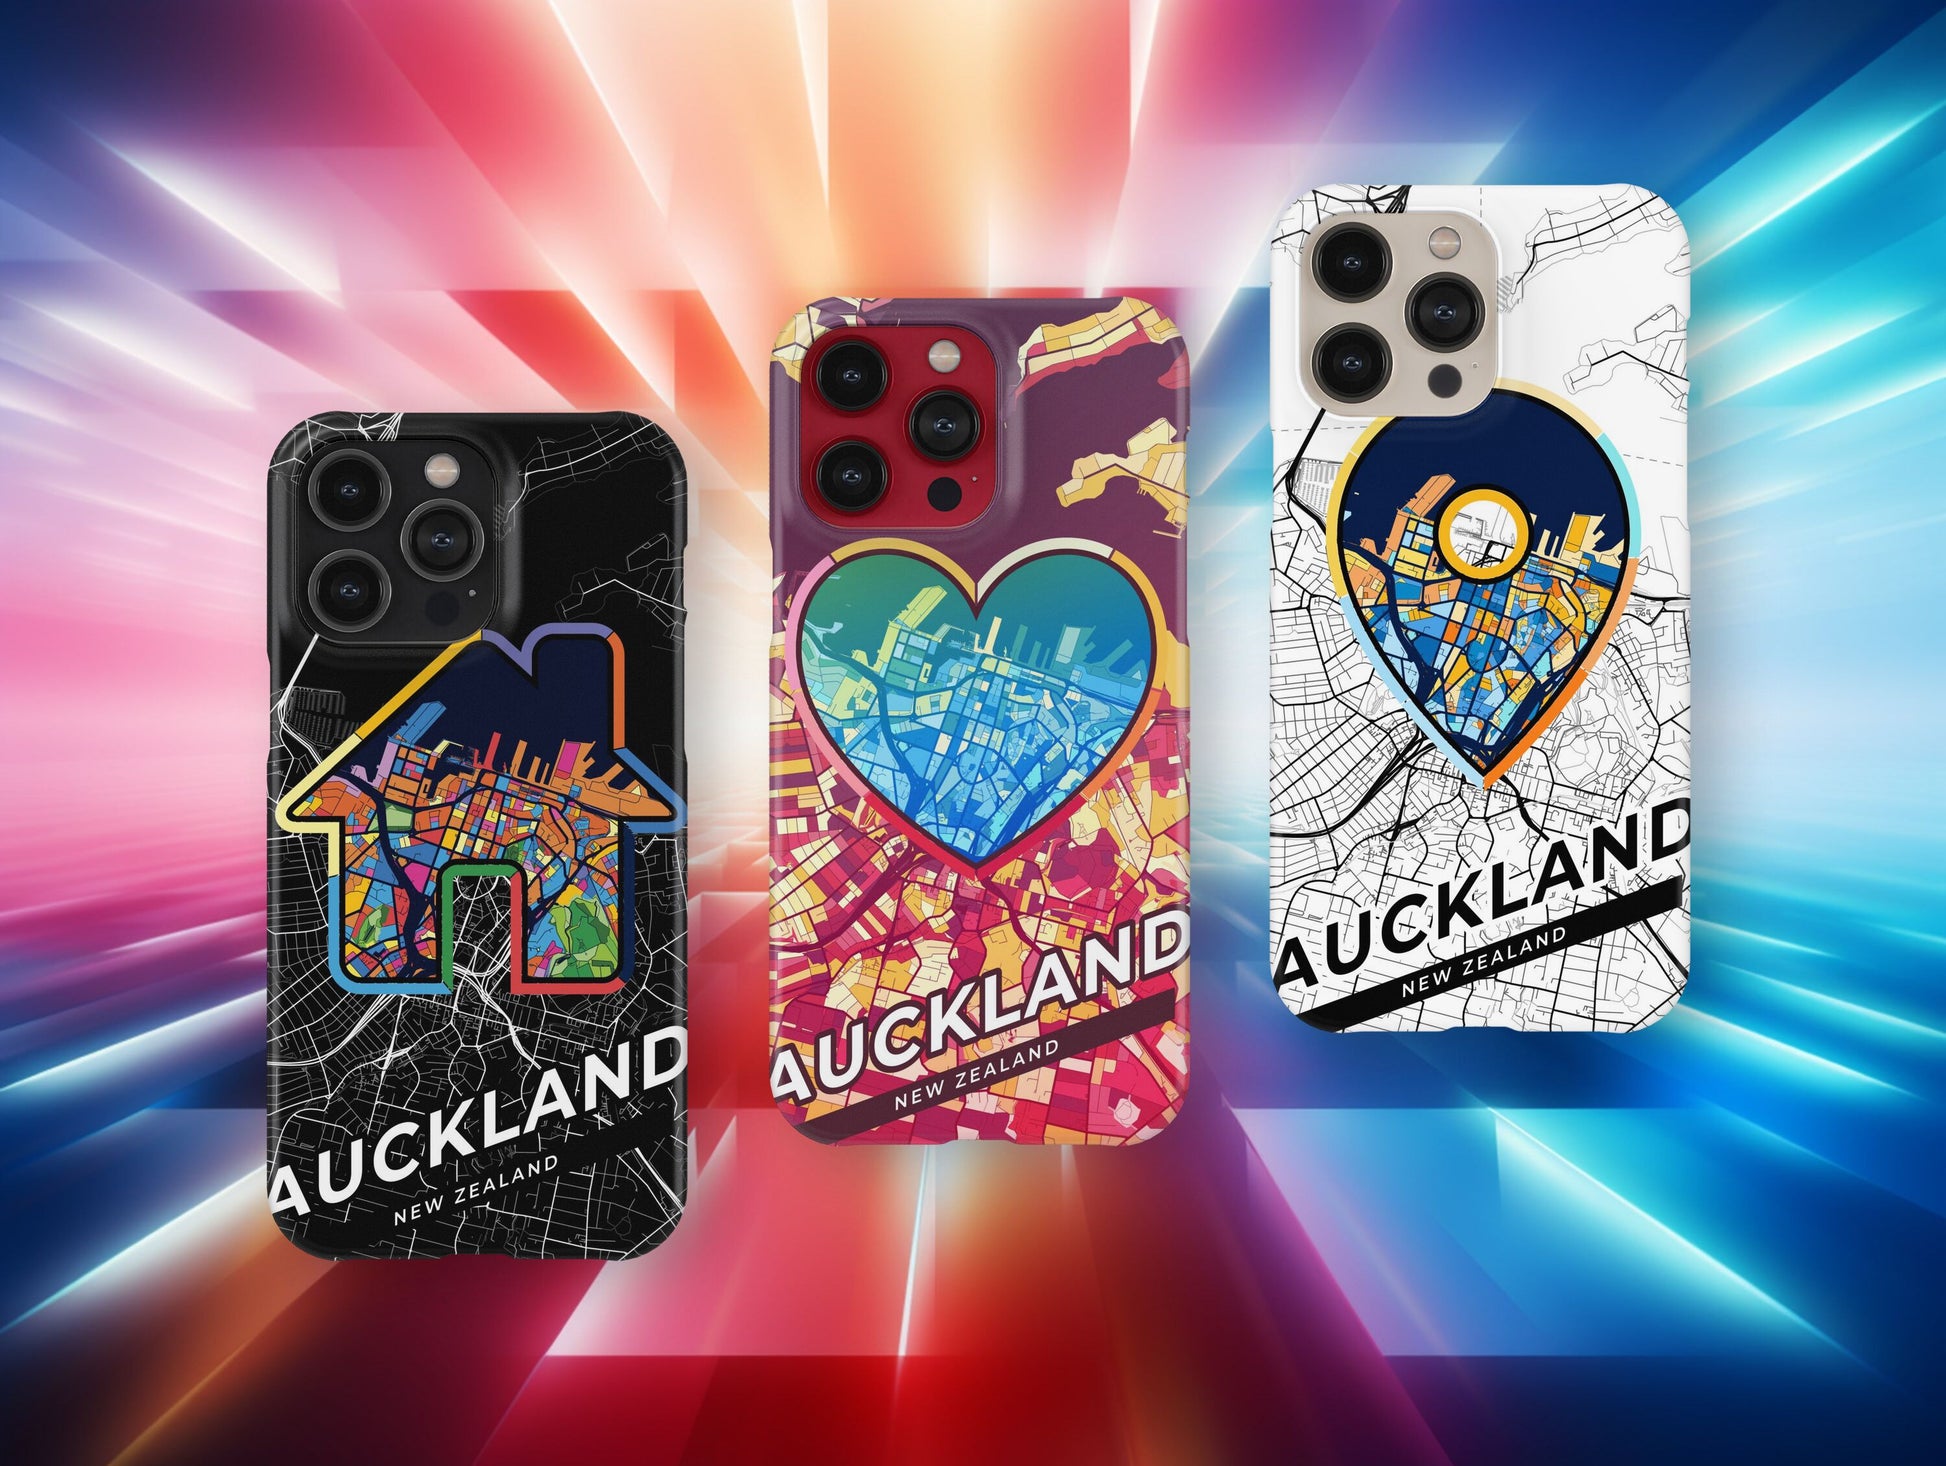 Auckland New Zealand slim phone case with colorful icon. Birthday, wedding or housewarming gift. Couple match cases.